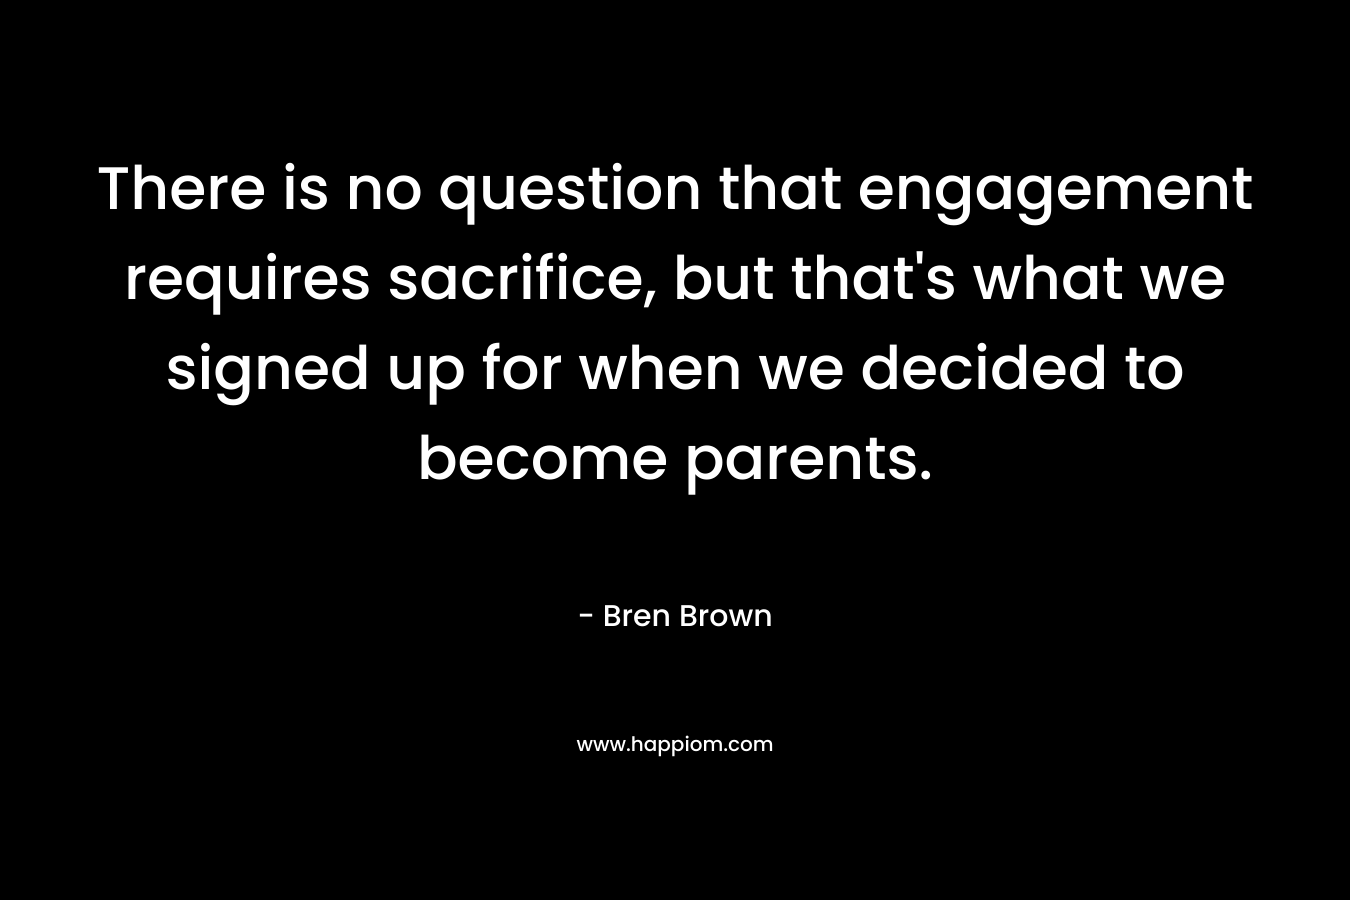 There is no question that engagement requires sacrifice, but that’s what we signed up for when we decided to become parents. – Bren Brown